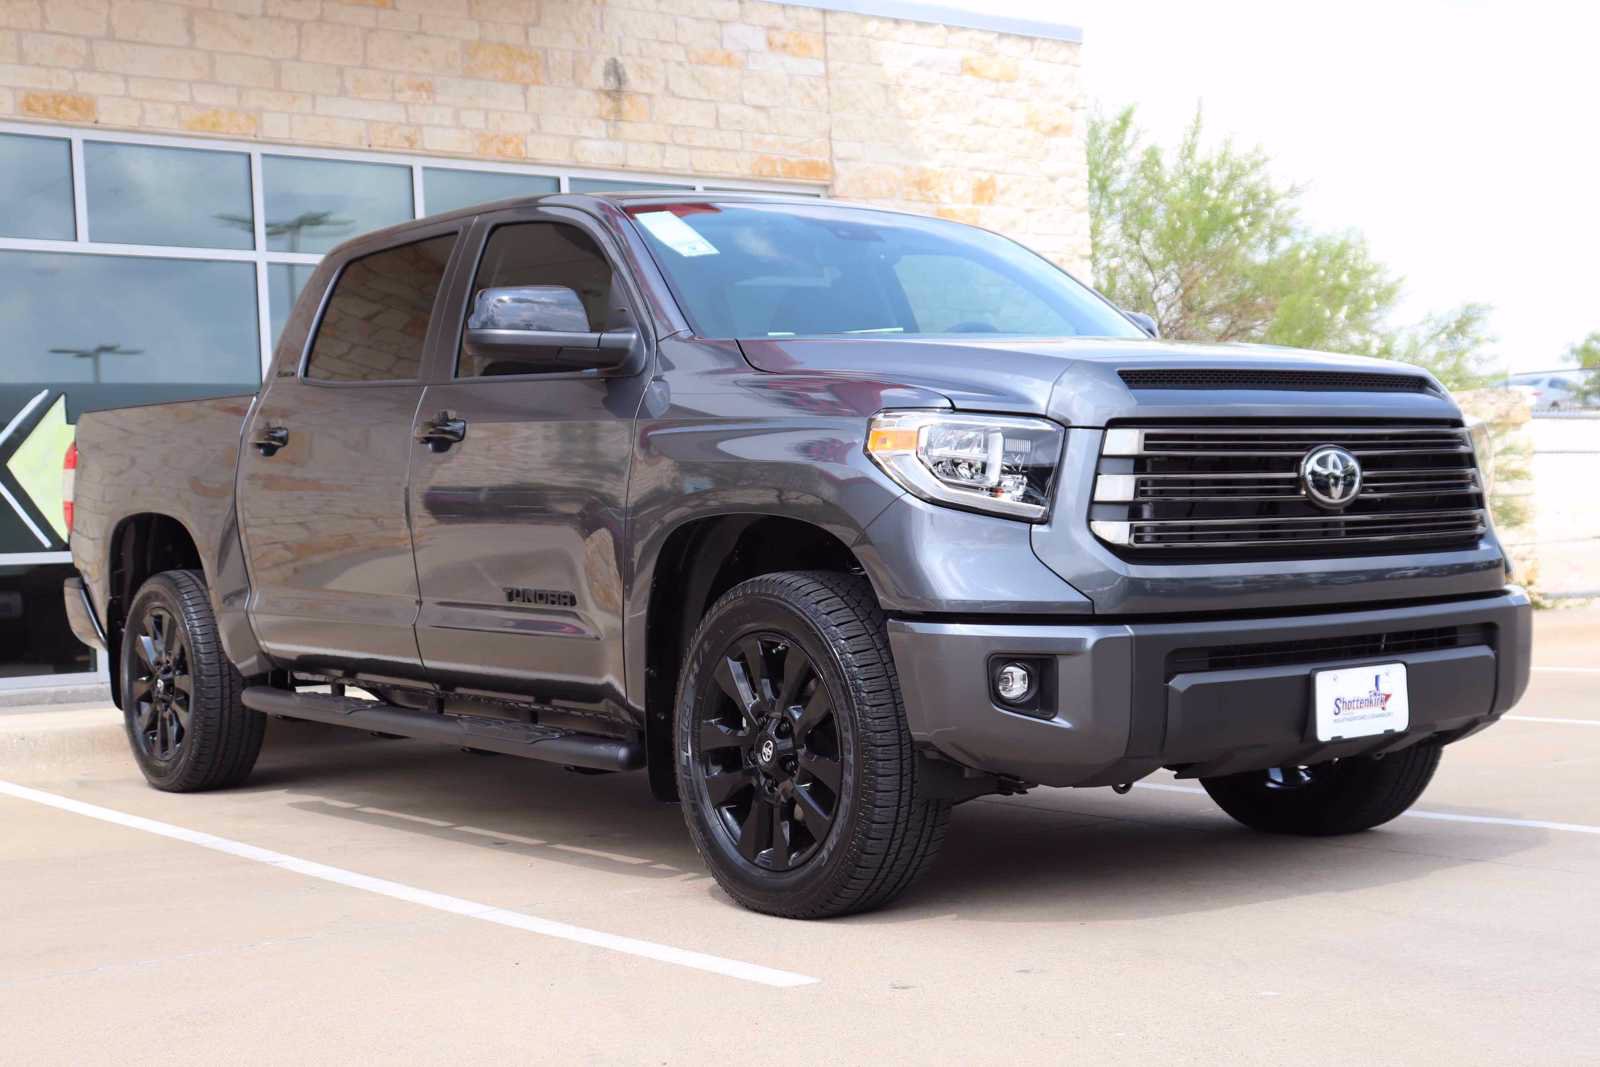 New 2021 Toyota Tundra 2WD Limited Crew Cab Pickup in Weatherford #